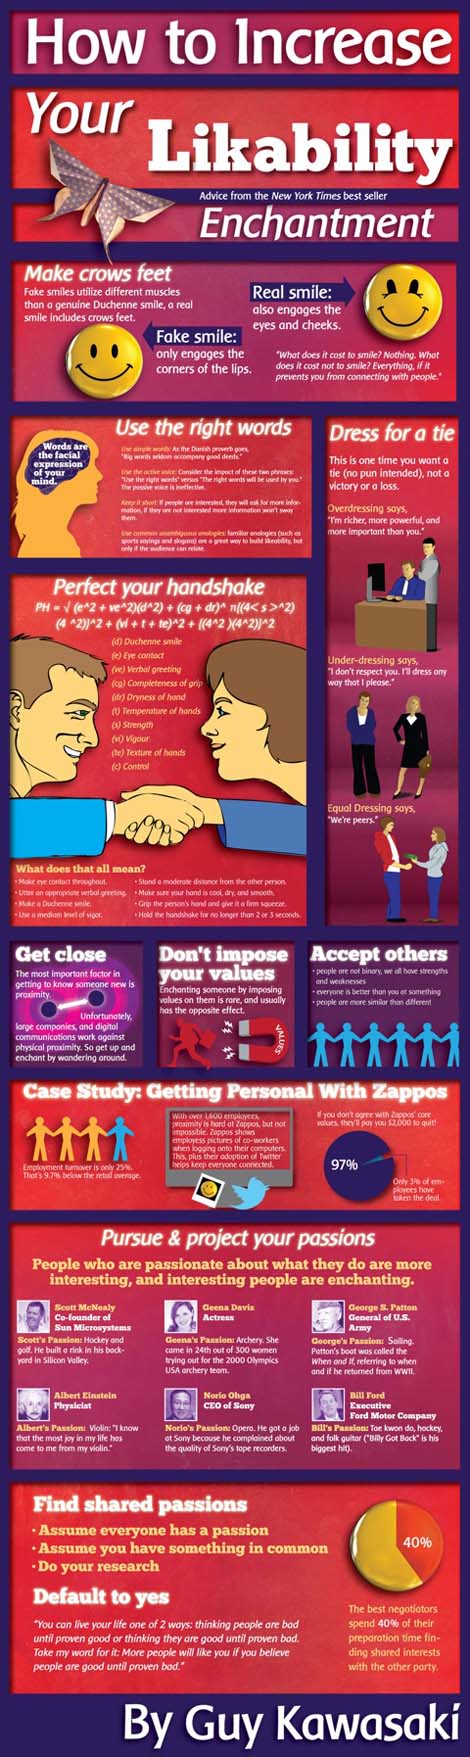 Follow these simple tips and will be networking like a pro and your likeability will climb (info-graphic)